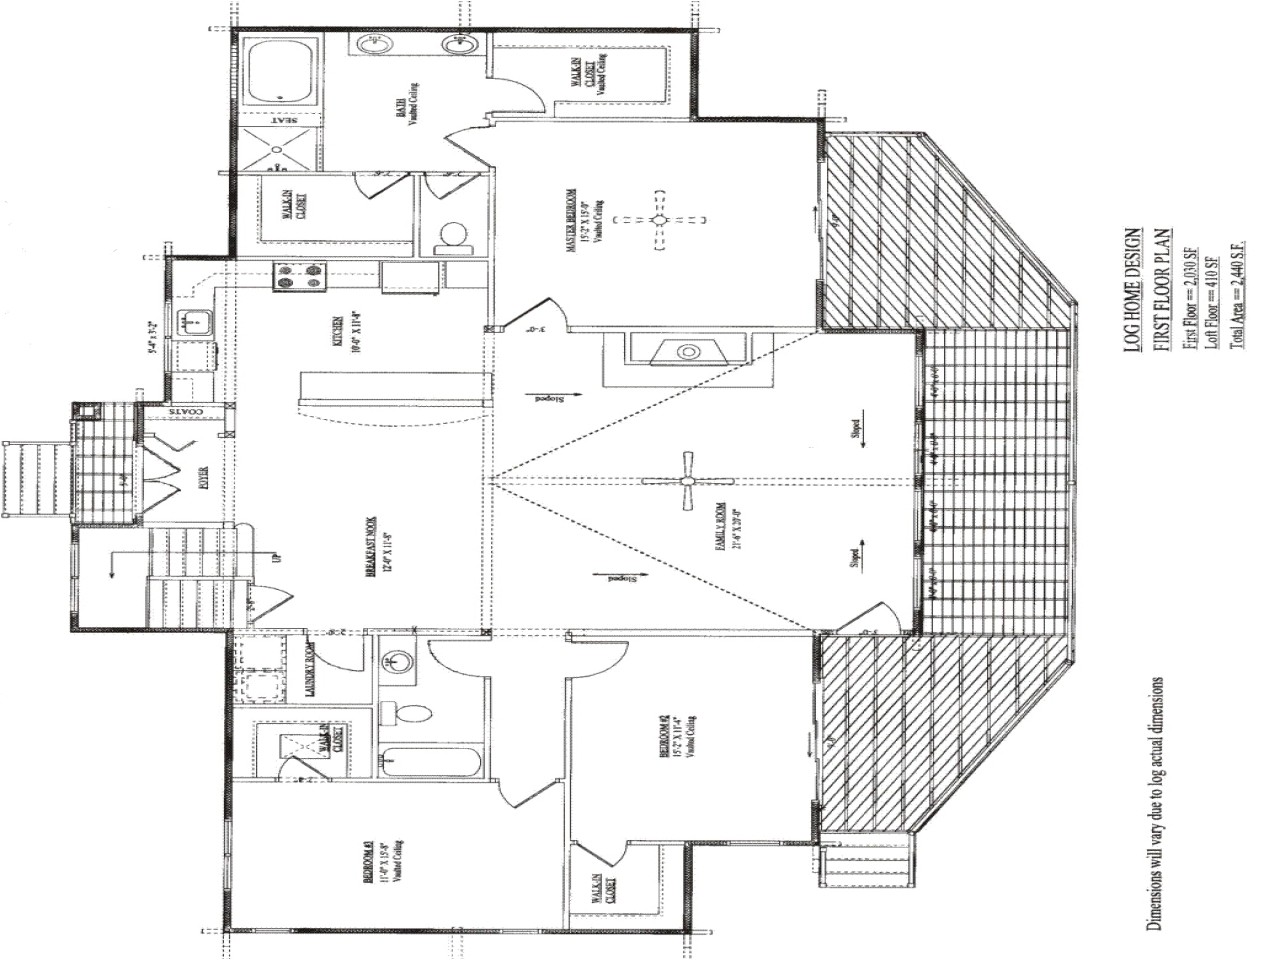 Log Home Floor Plans with Prices Ranch Floor Plans Log Homes Log Home Floor Plans Log Home